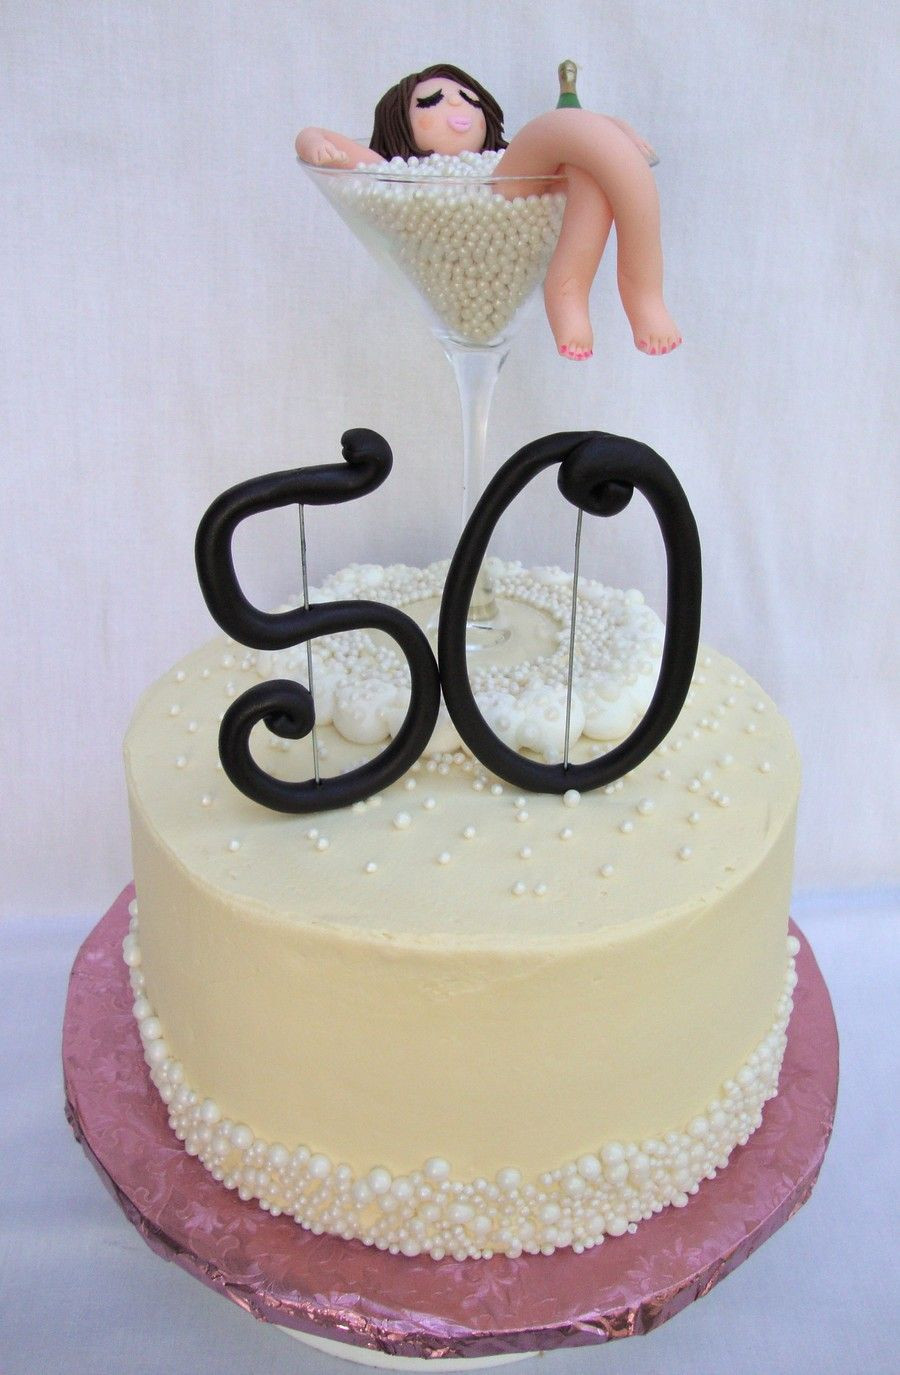 Funny Birthday Cake Images
 champagne bubble bath 50th